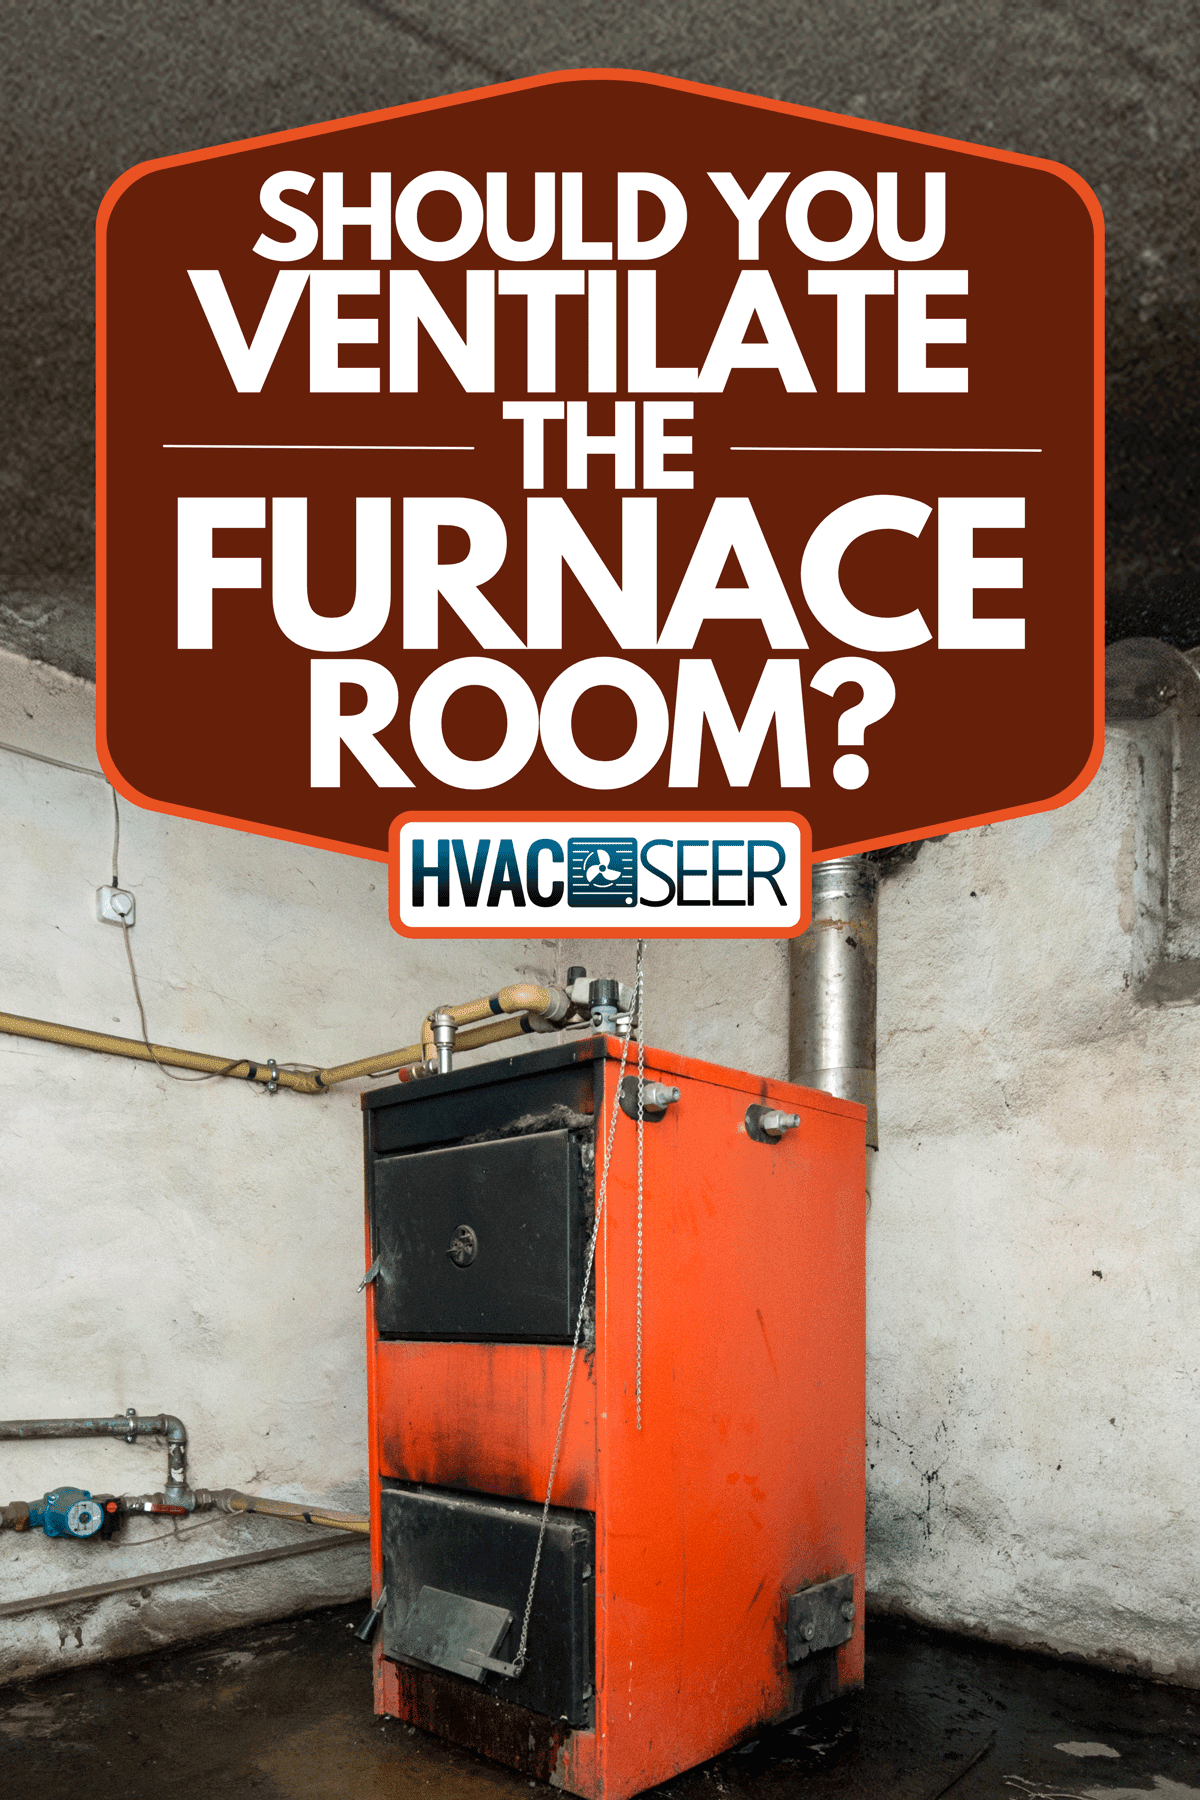 A home humidifier attached to the return duct with a bypass connection to the supply hot air, Should You Ventilate The Furnace Room?